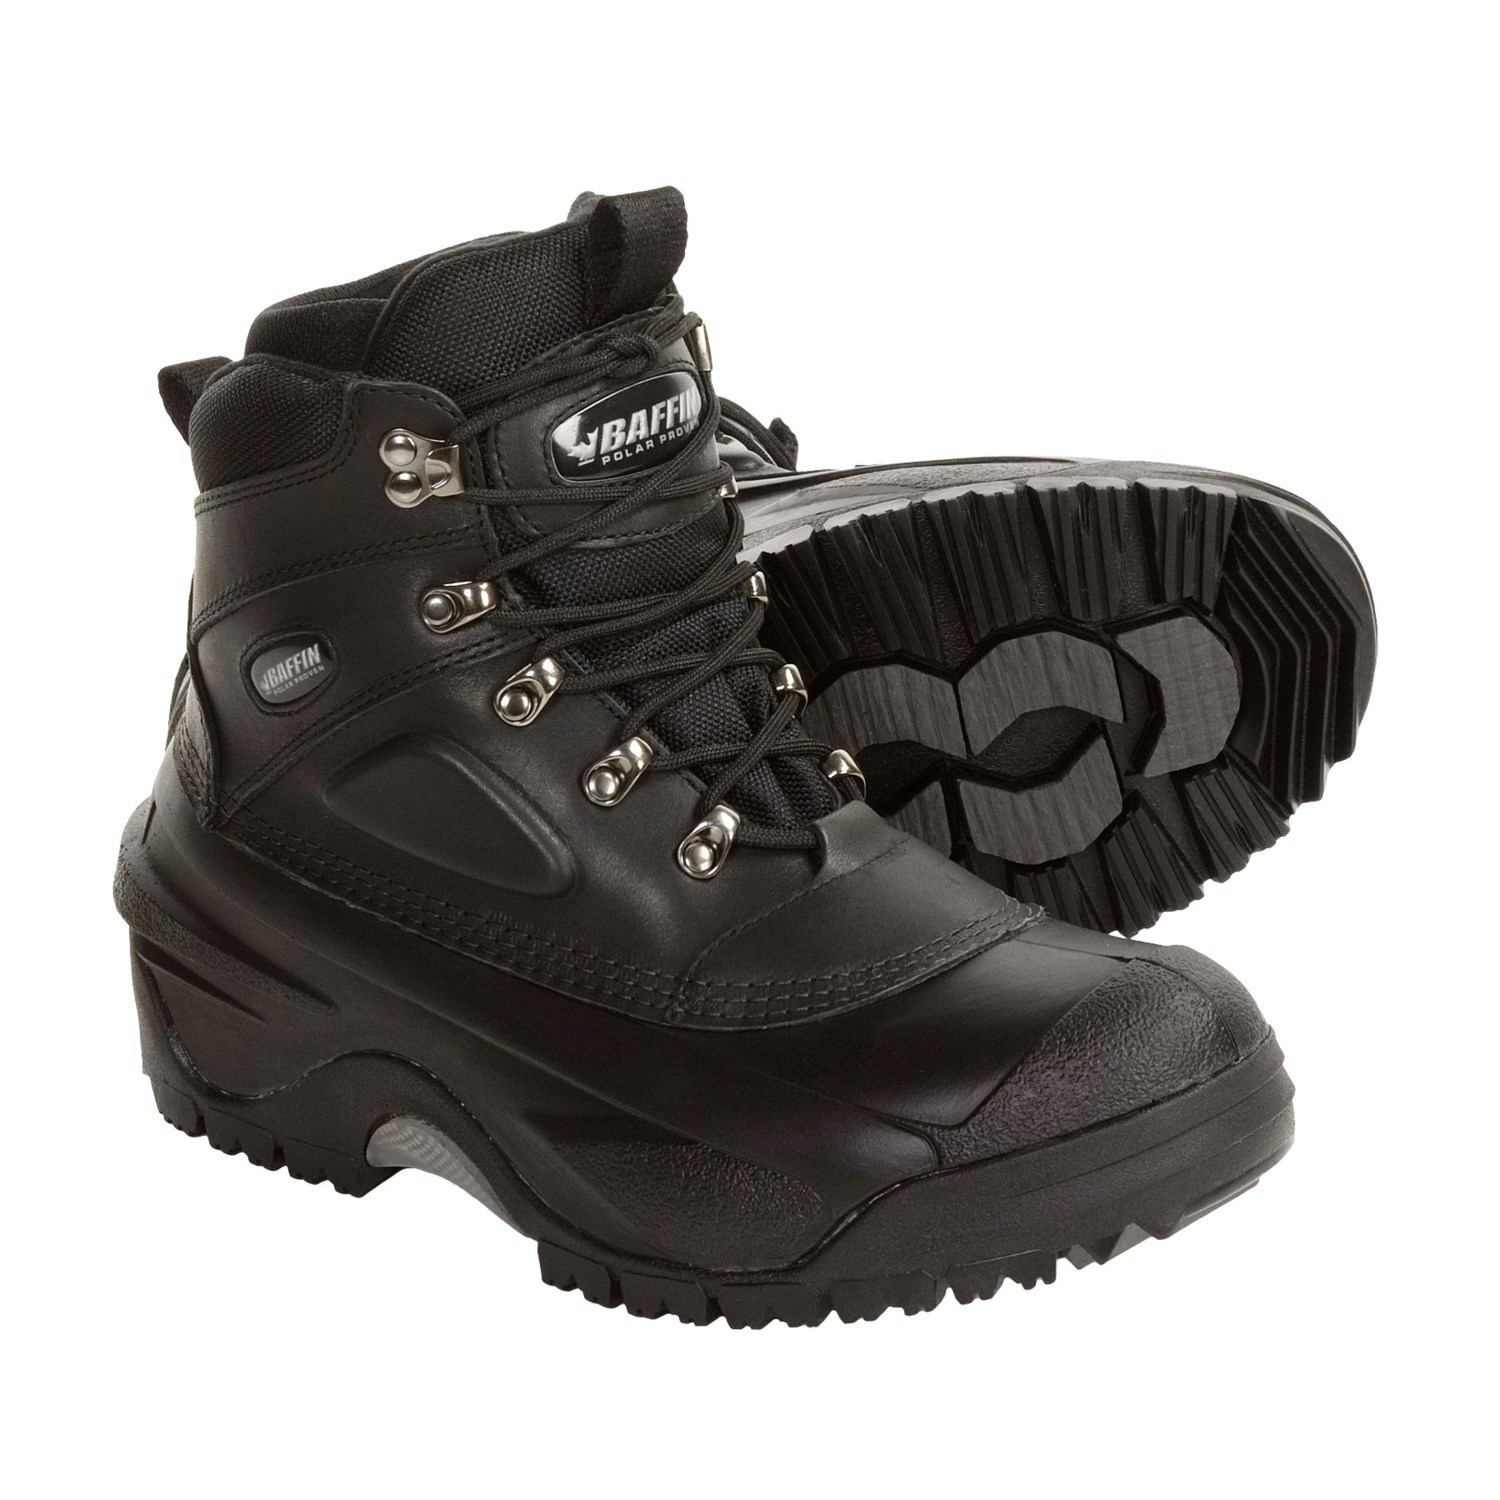 Baffin Outback Winter Pac Boots (For Men) 3126H - Save 72%